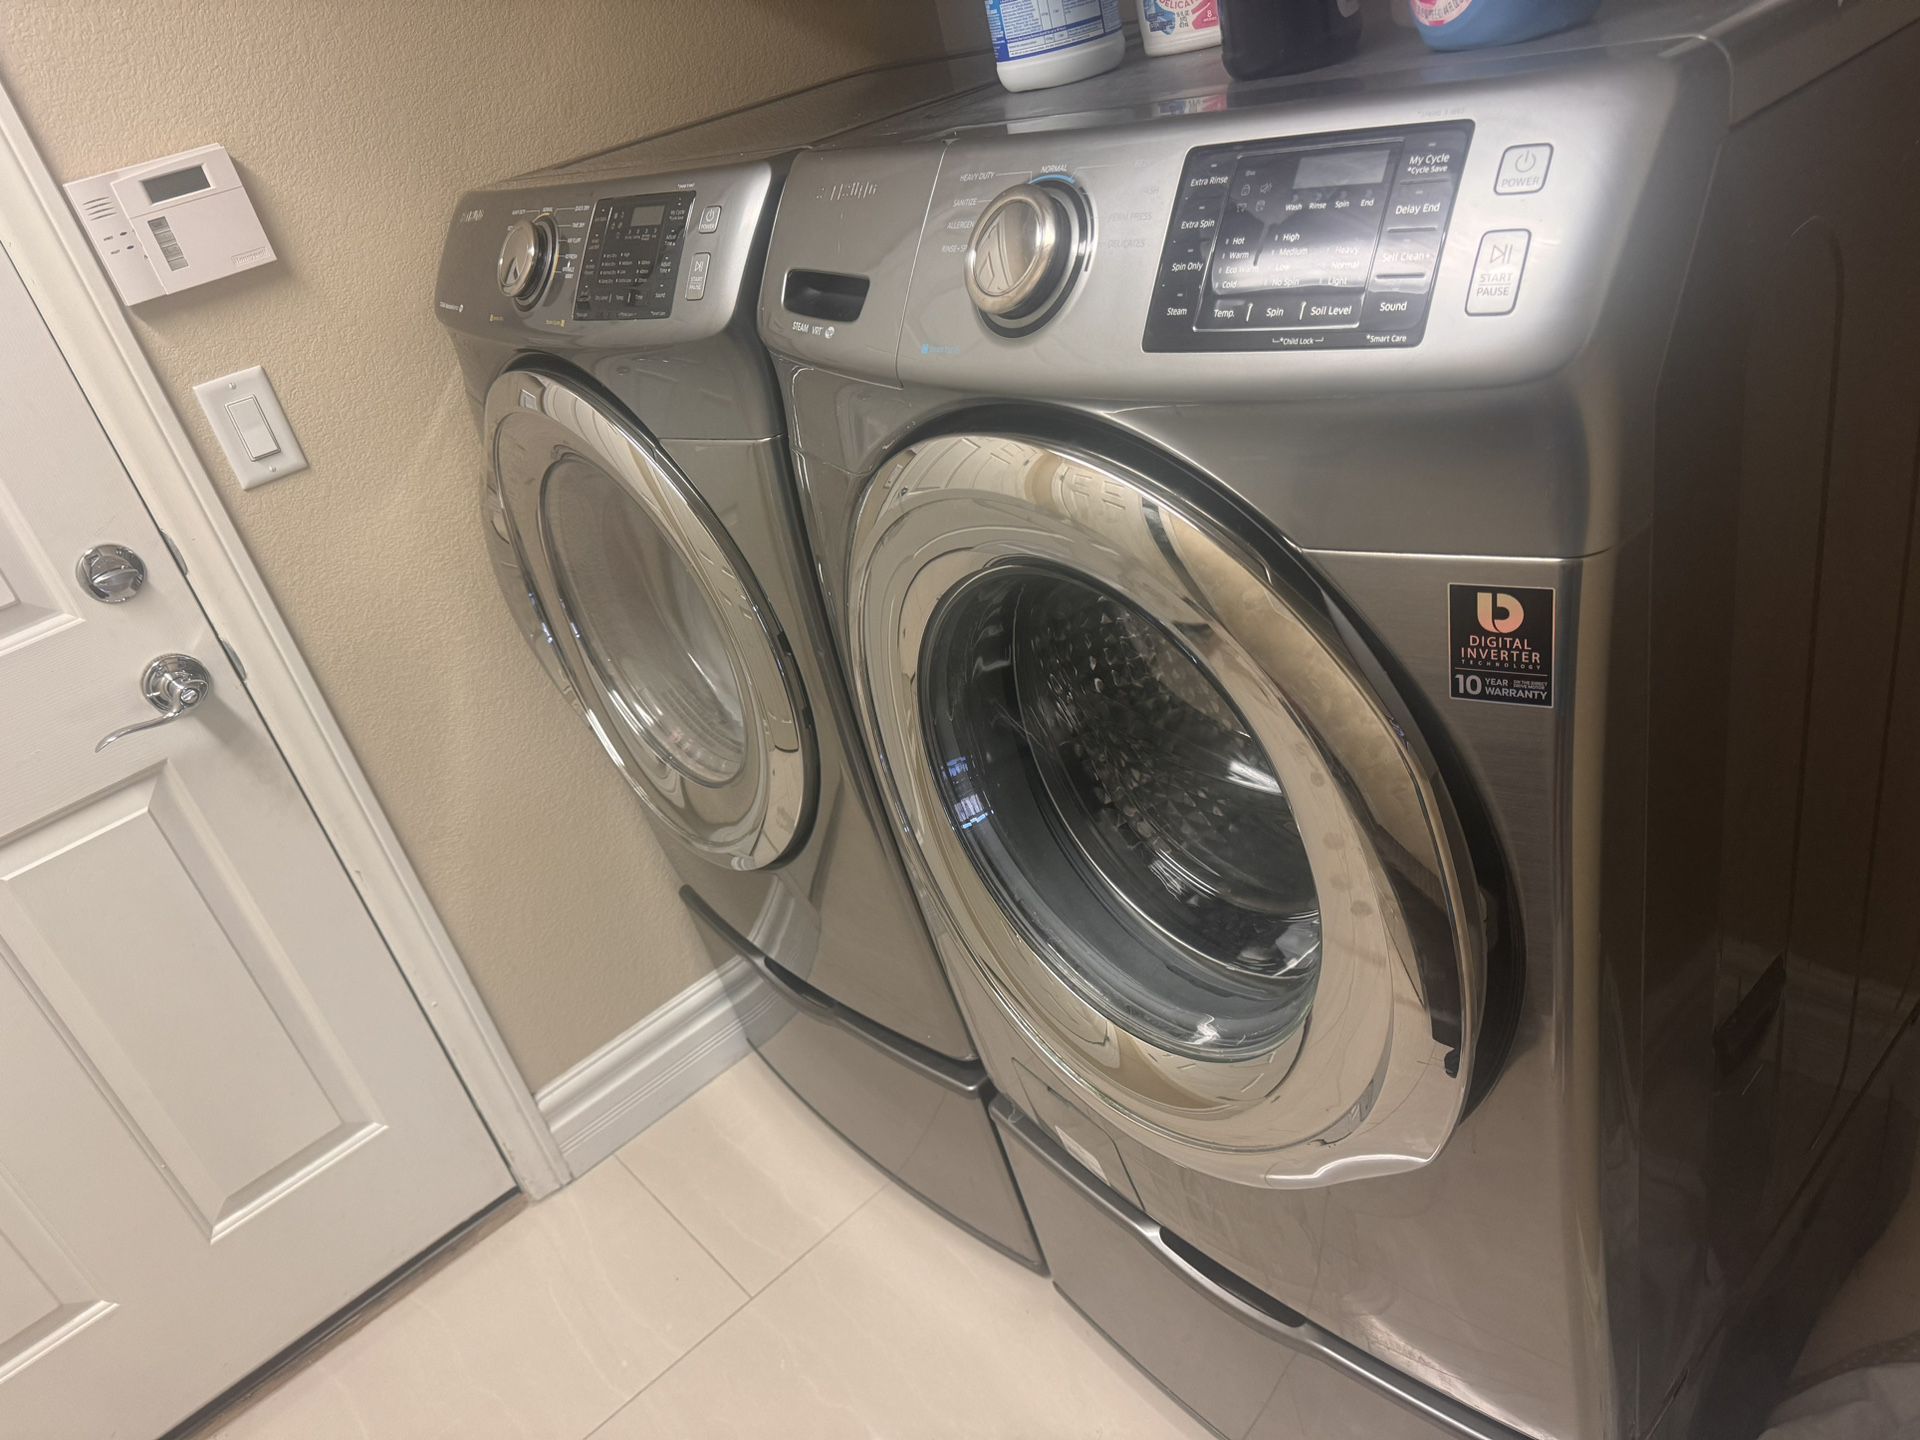 SAMSUNG washer and dryer 